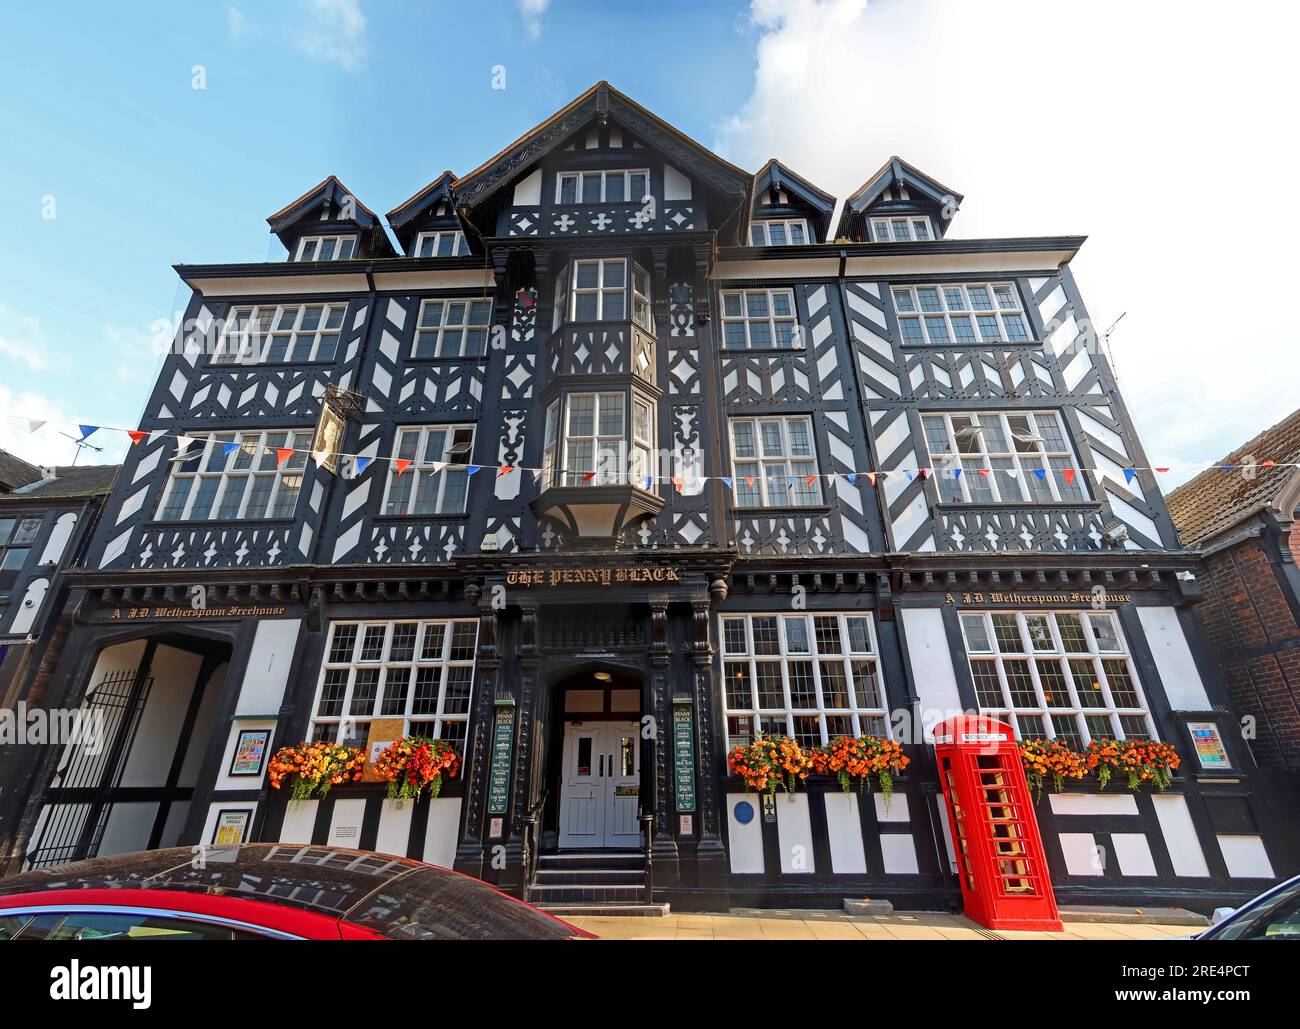 Purpose built liftable post office 1914, The Penny Black pub, JD Wetherspoons, 110 Witton Street, Northwich, Cheshire, CW9 5AB Stock Photo